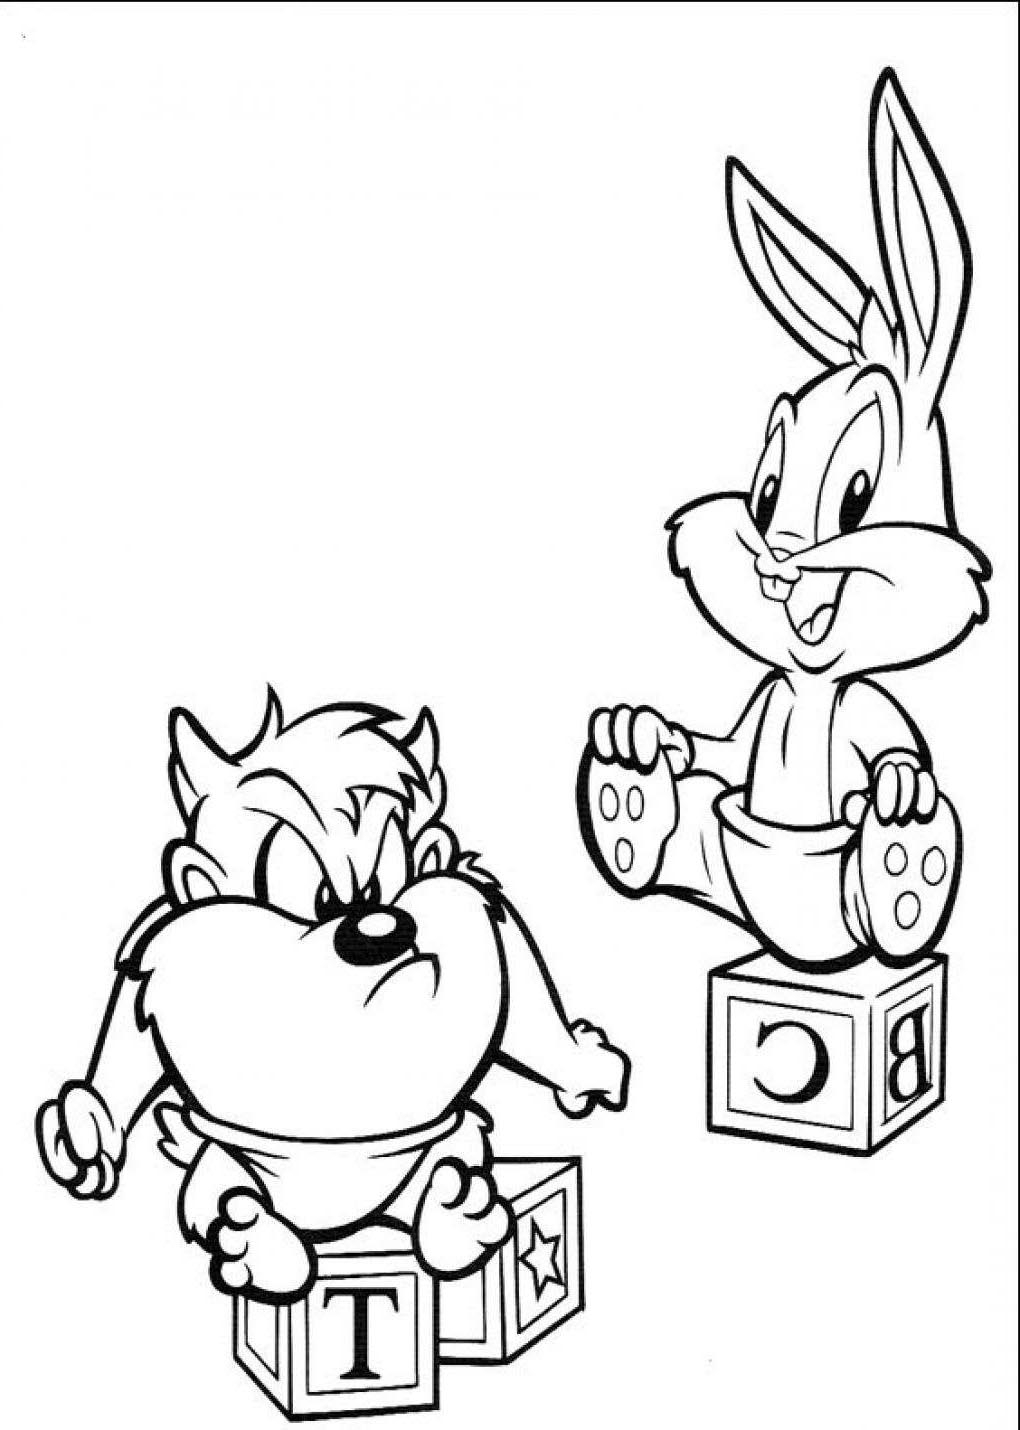 Taz Cartoon Coloring Pages Bugs Bunny Clipart Black And White Best Menu Template Design